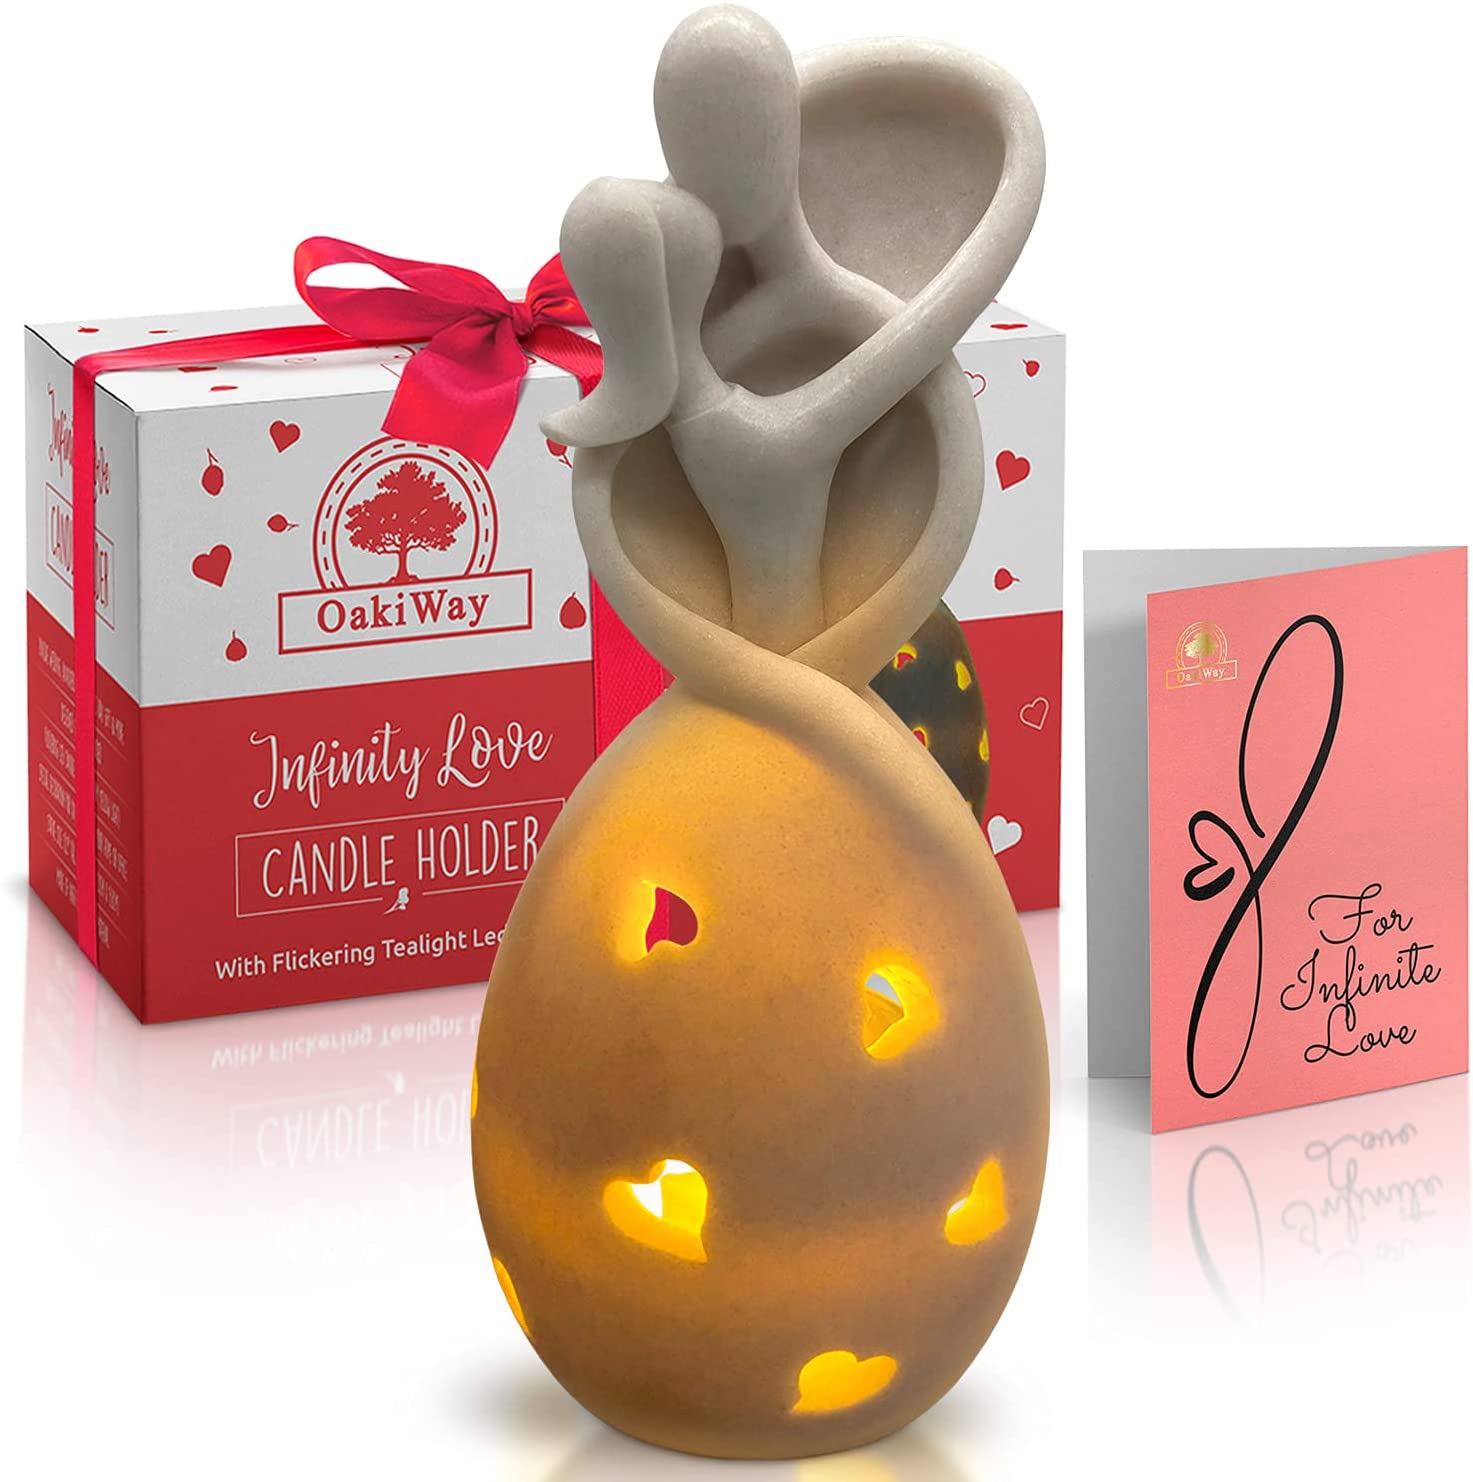 Infinity Love Candle Holder Statue